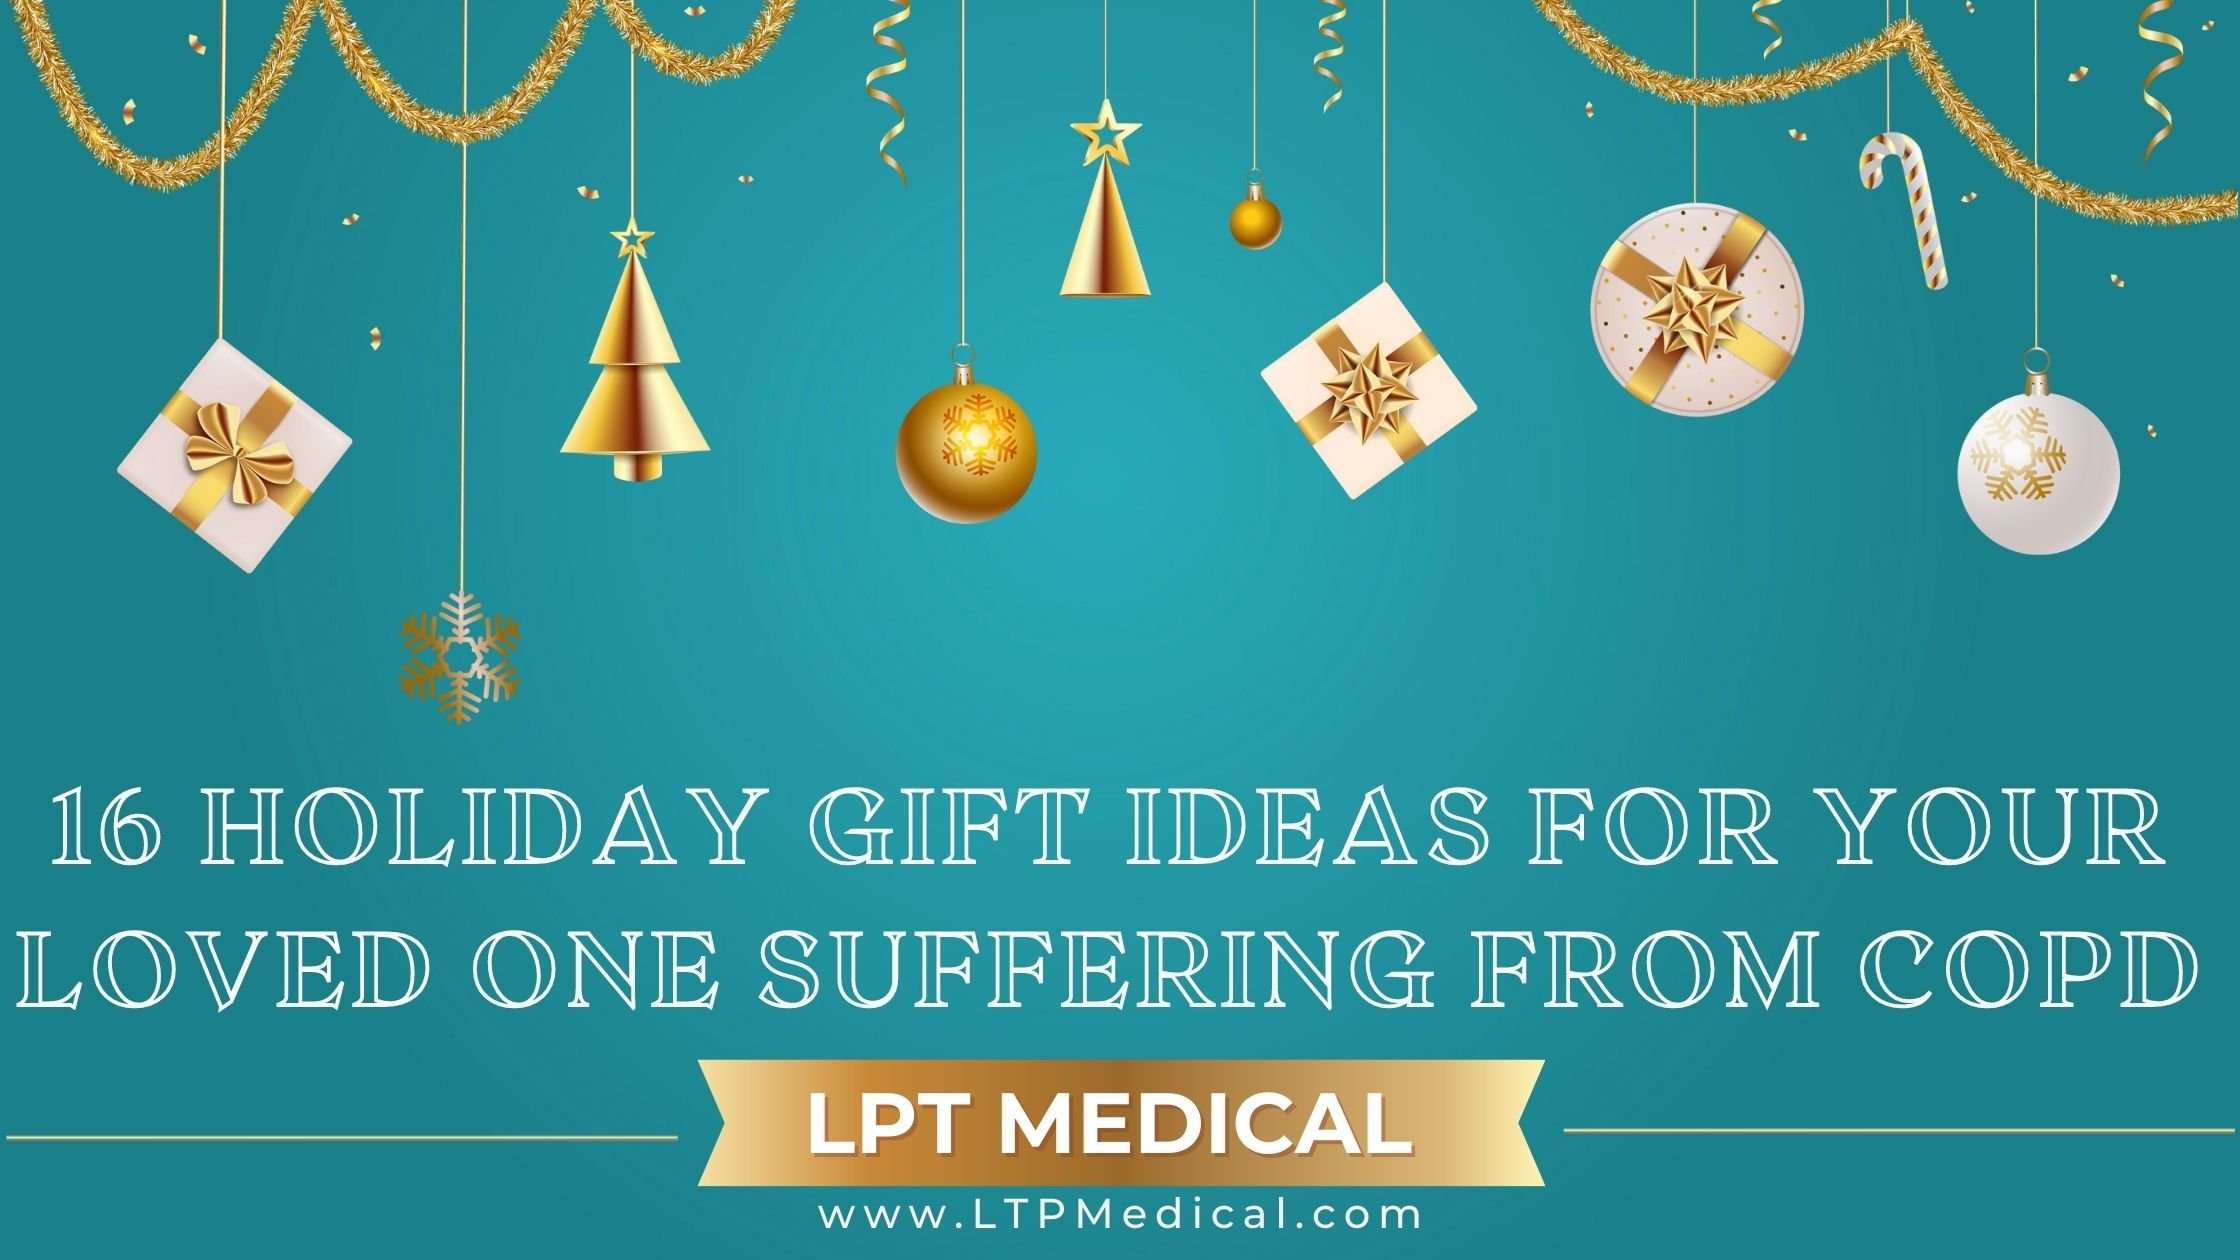 16 Holiday Gift Ideas for your Loved One Suffering from COPD